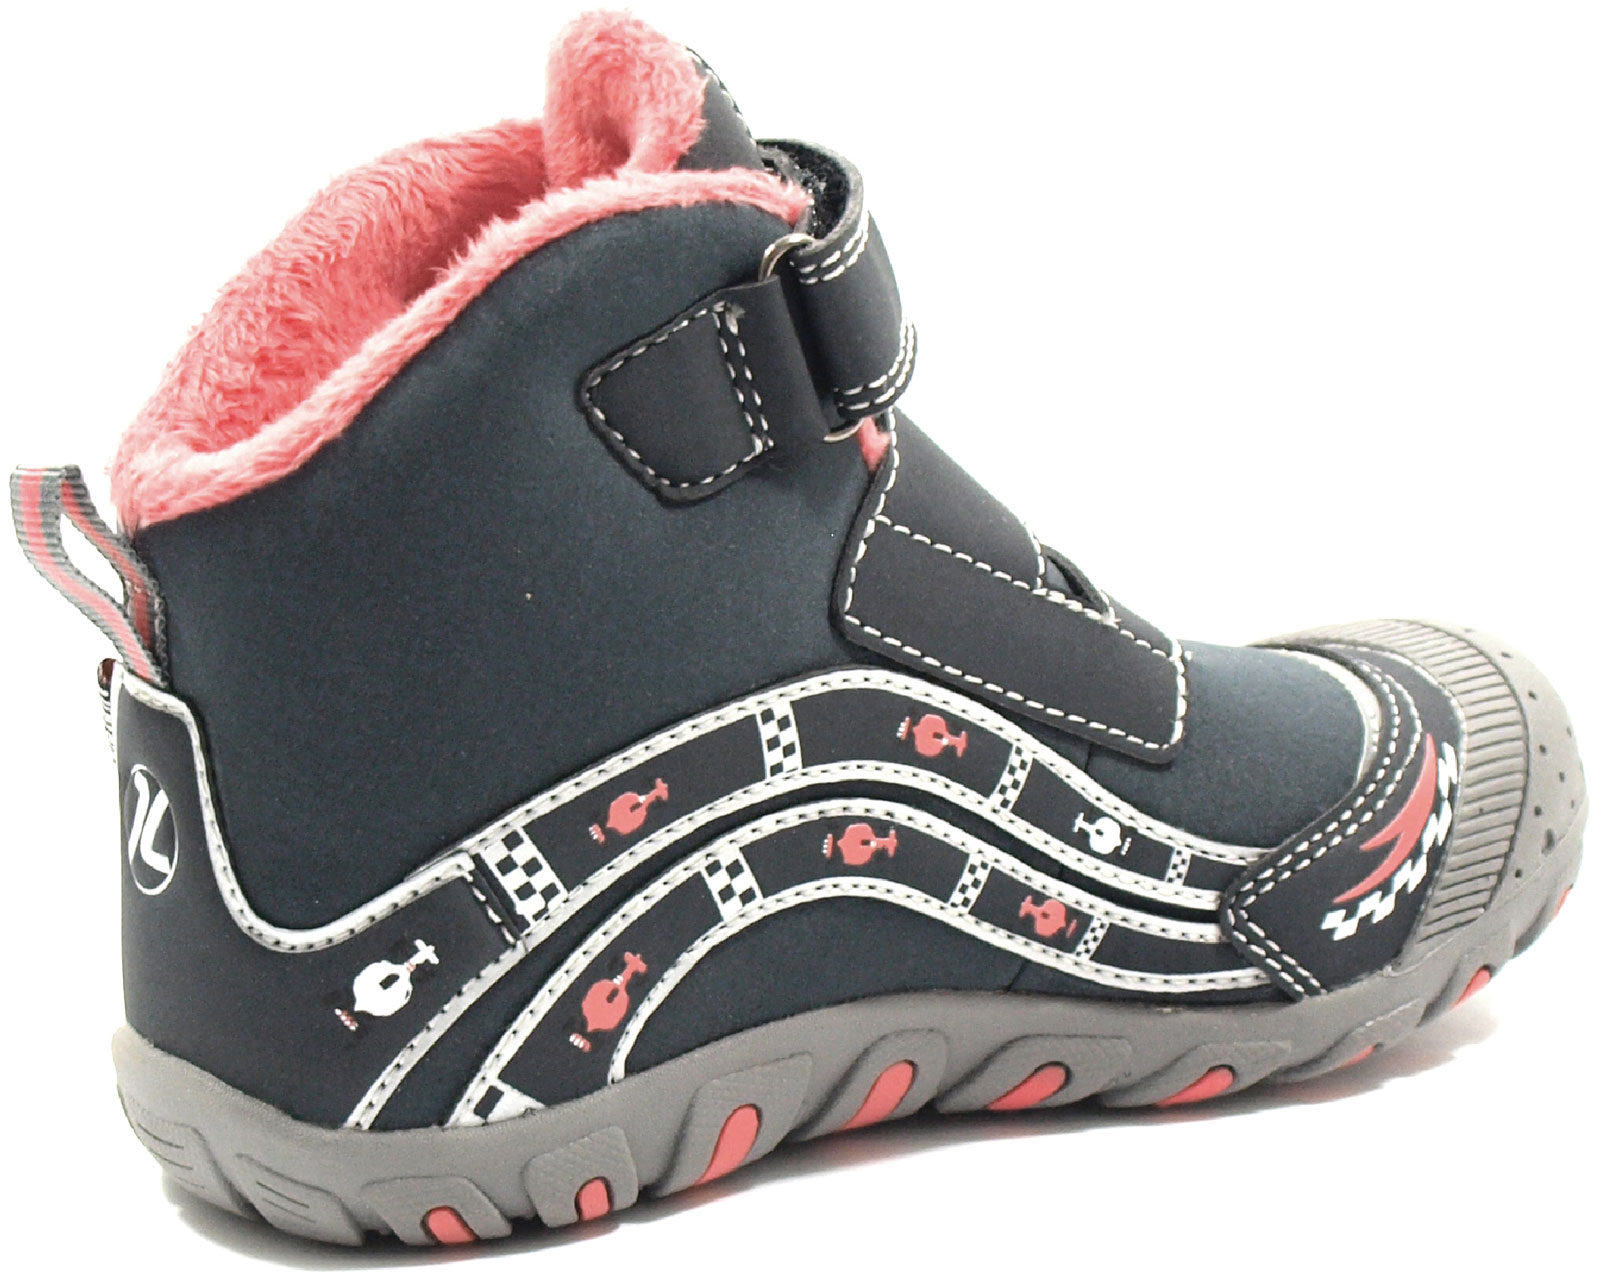 Children’s ankle boots